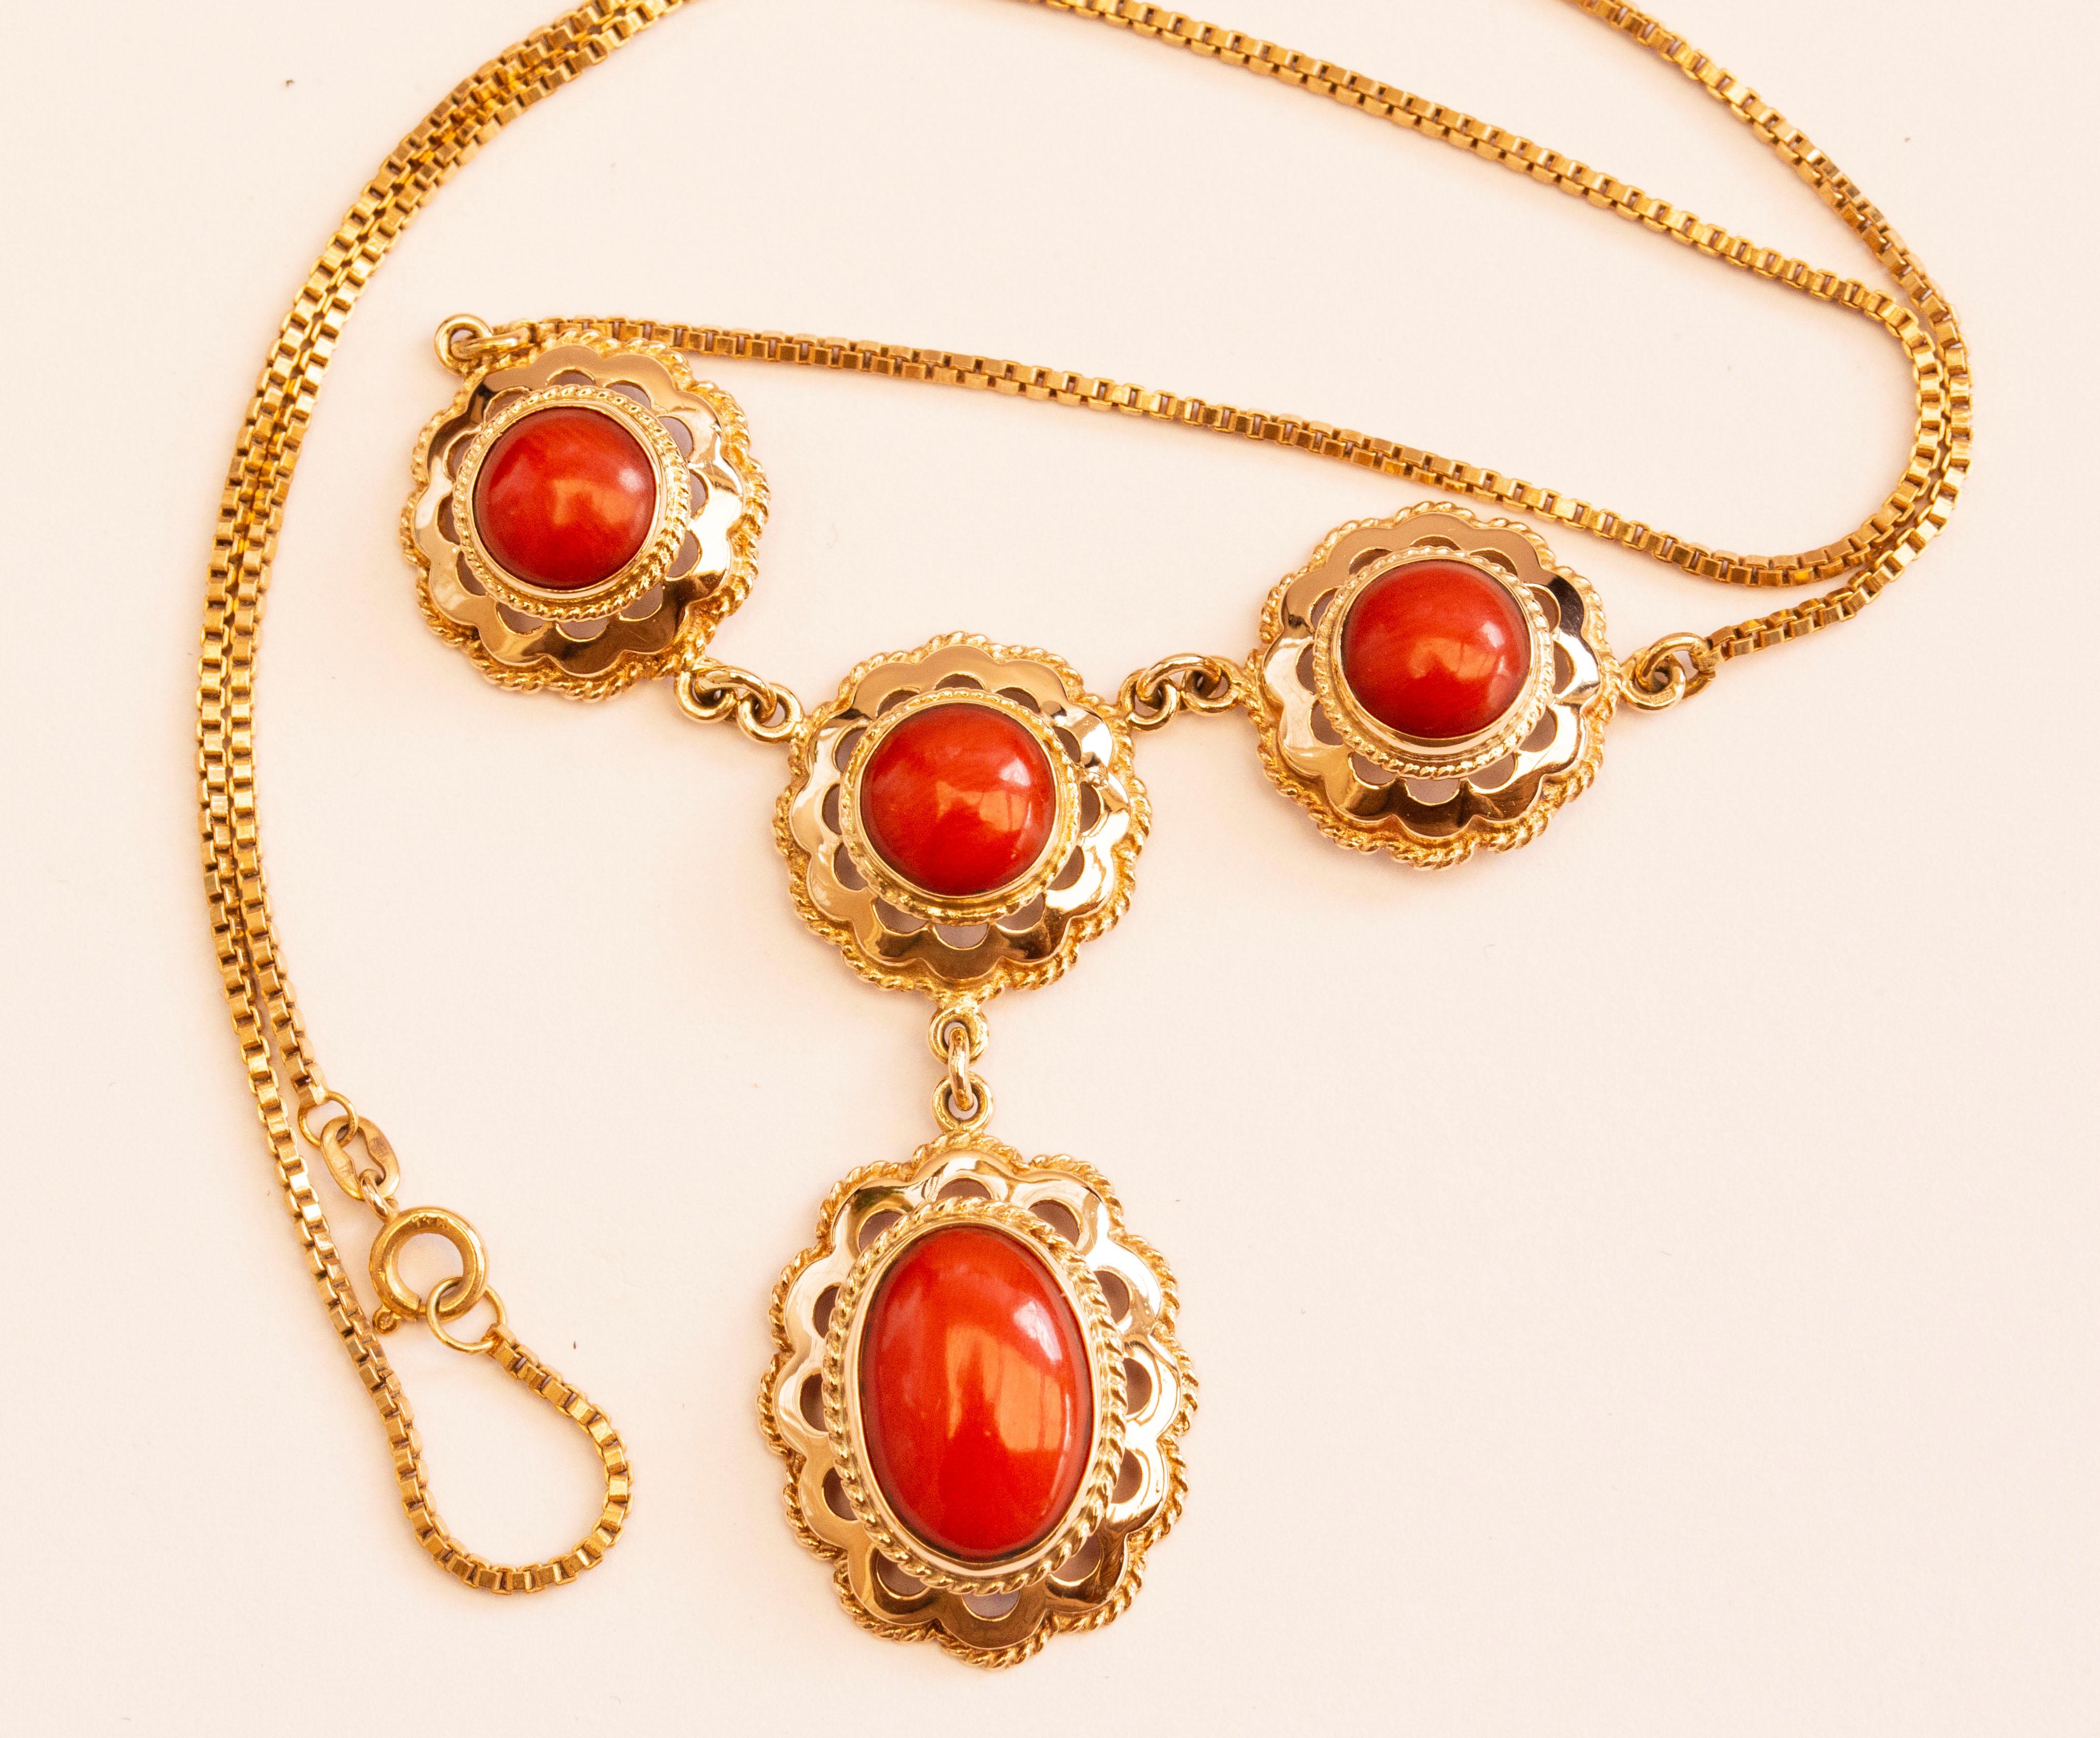 A vintage 14 karat yellow gold necklace with a gold ornament set with genuine red coral cabochons. The ornament consists of three connected gold flower-shaped links with cabochon-cut round red coral, of which one is linked with an oval red coral set